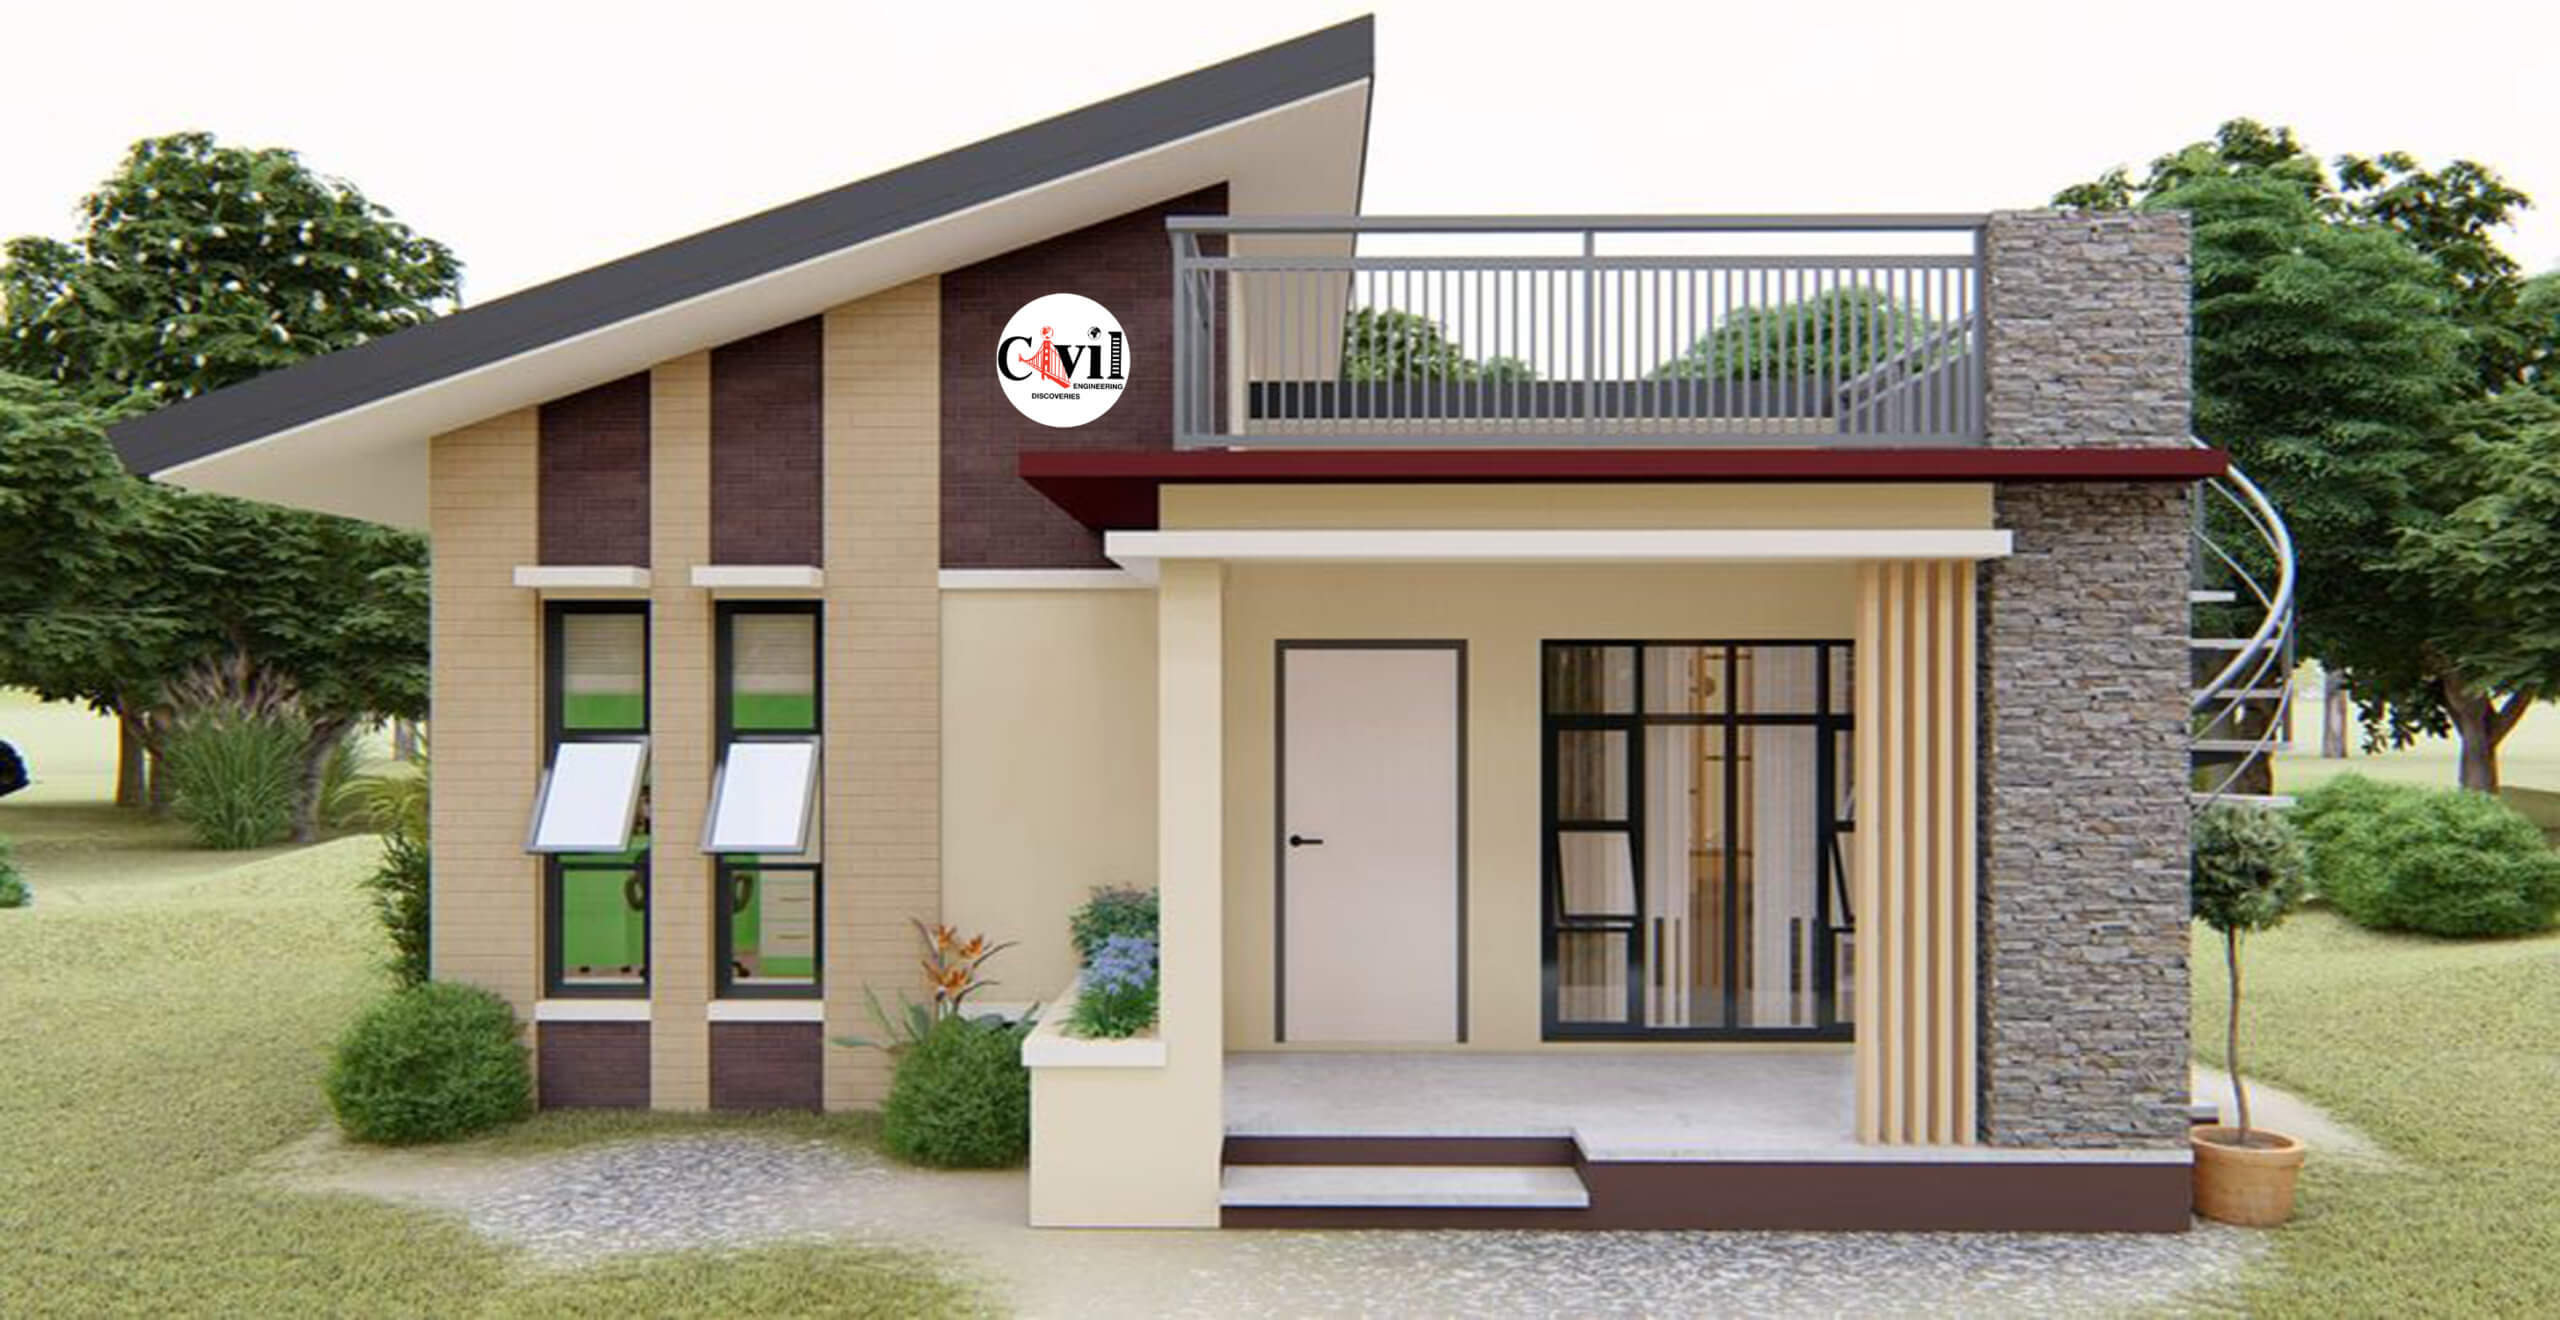 80 SQ.M. Modern Bungalow House Design With Roof Deck